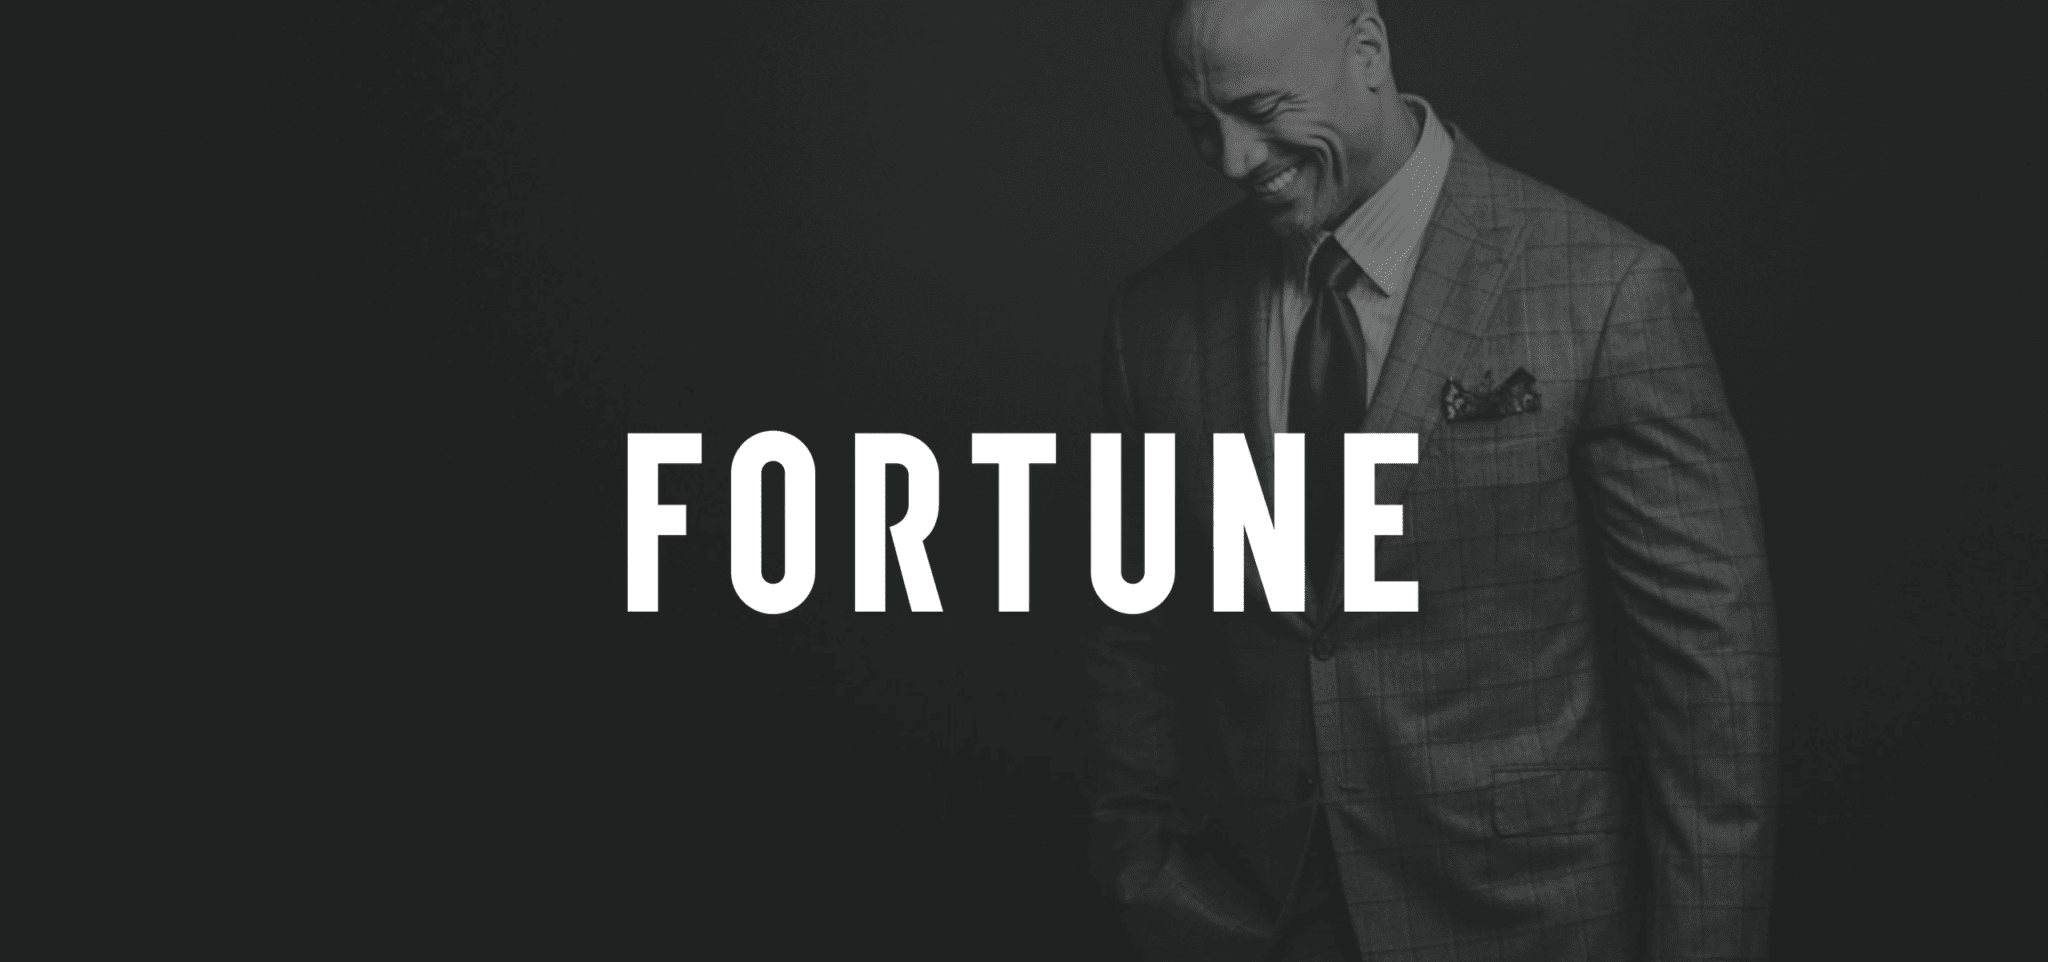 IU C&I Studios Page Black and white of white Fortune logo with Dwayne "The Rock" Johnson with Fortune Magazine in the background posing for camera looking down and smiling